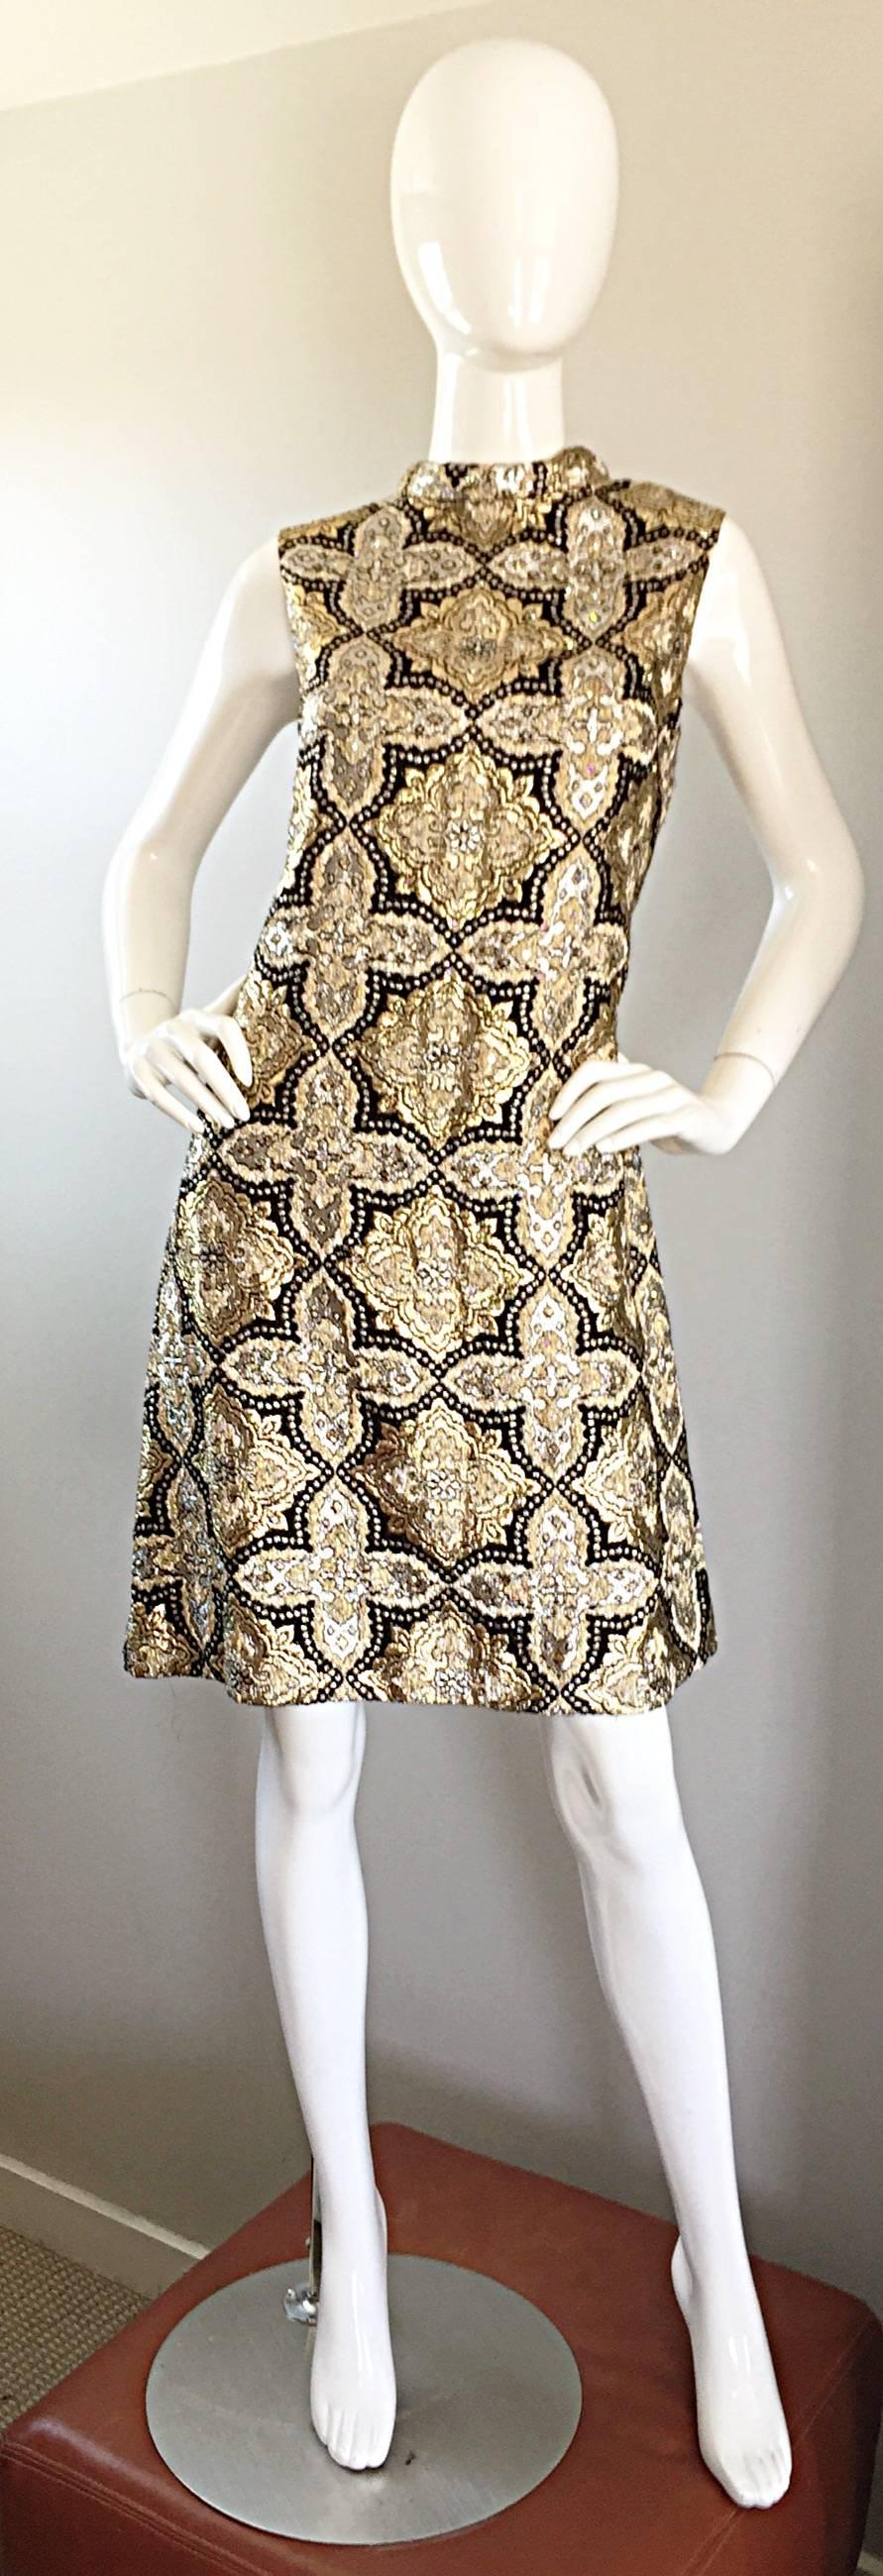 Stunning 60s vintage PAT SANDLER gold, silver and black silk brocade A-Line dress, encrusted with hundreds of hand-sewn rhinestones throughout! Super flattering A-Line fit, with a chic fitted bodice. Beautiful metallic symmetrical crests printed